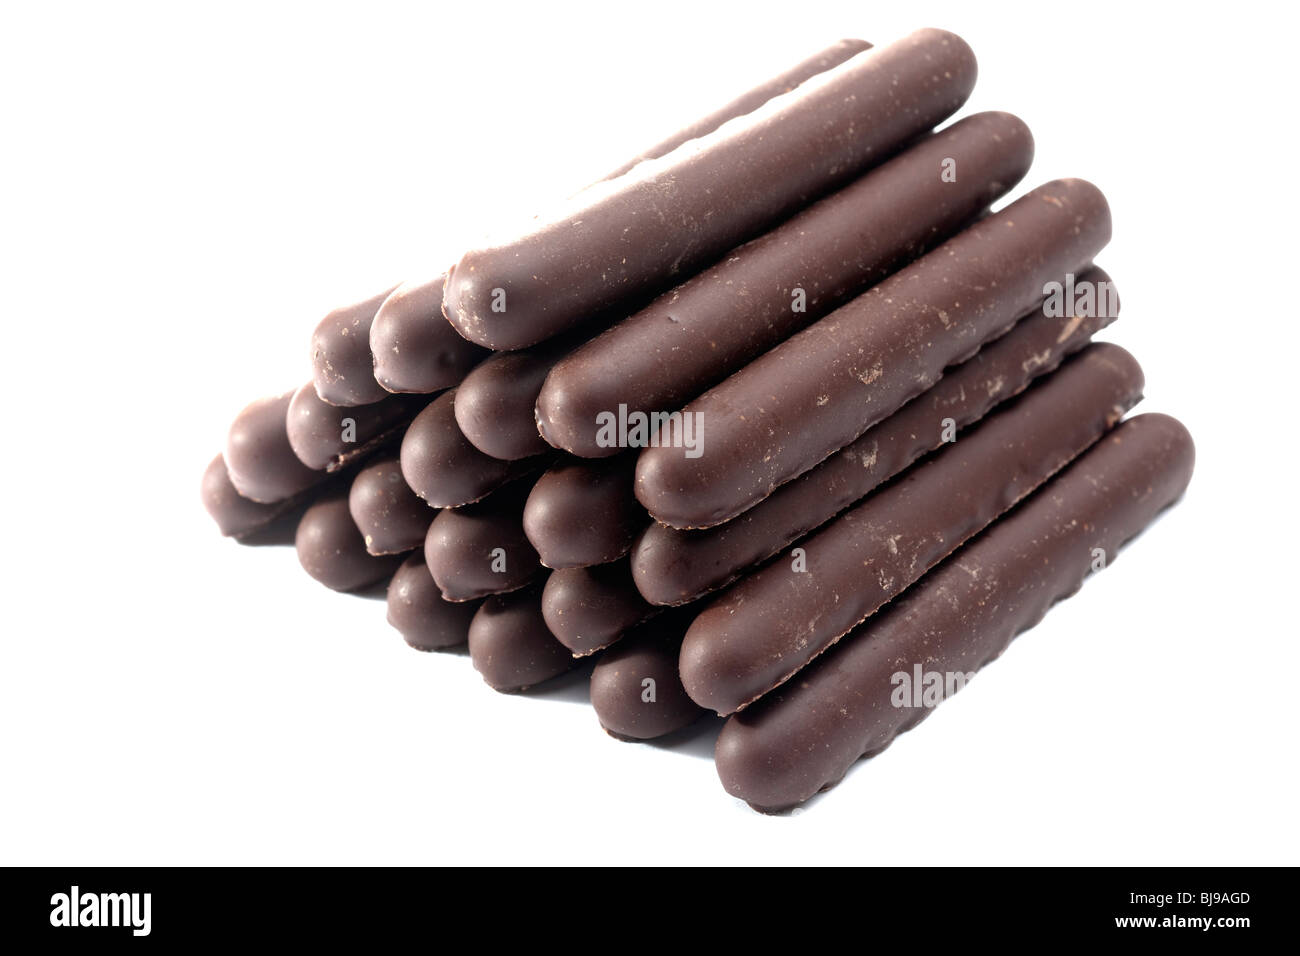 Pile of dark chocolate finger biscuits Stock Photo